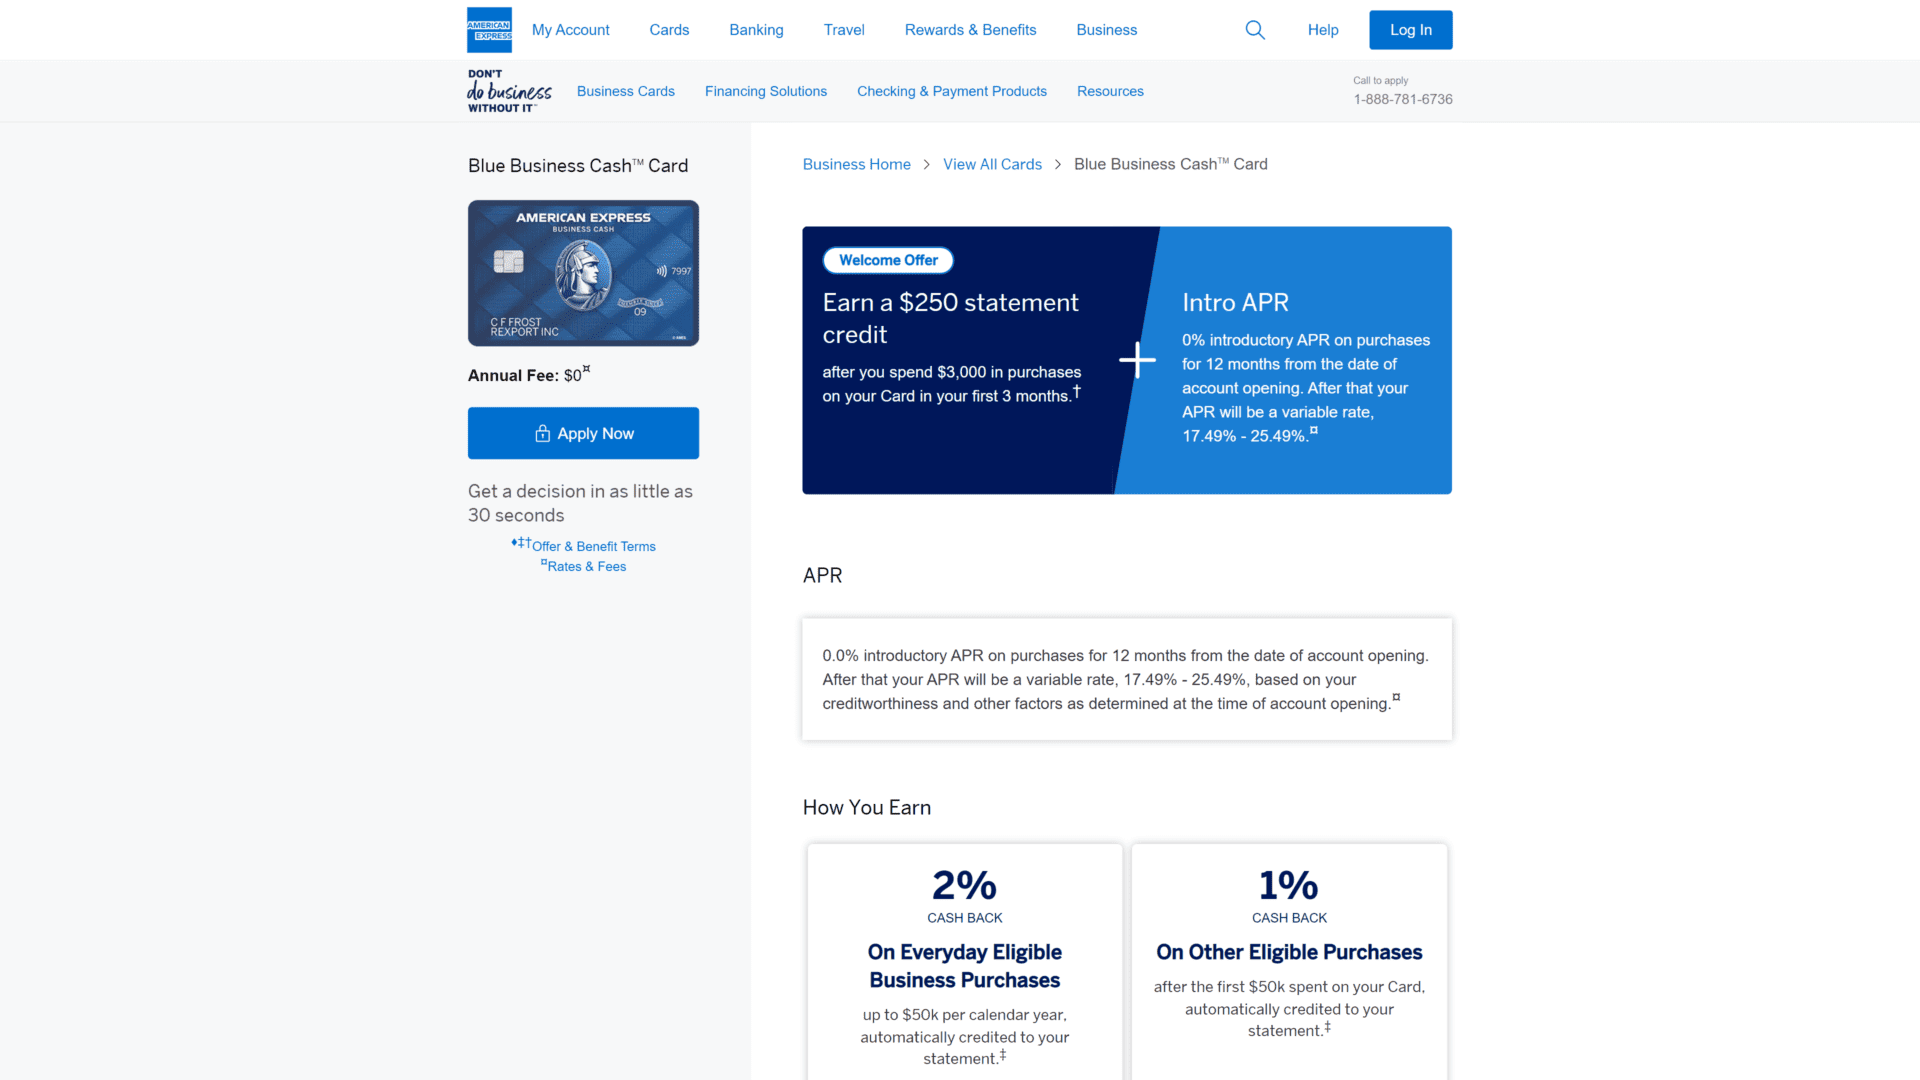 A screenshot of The American Express Blue Business CashTM card homepage